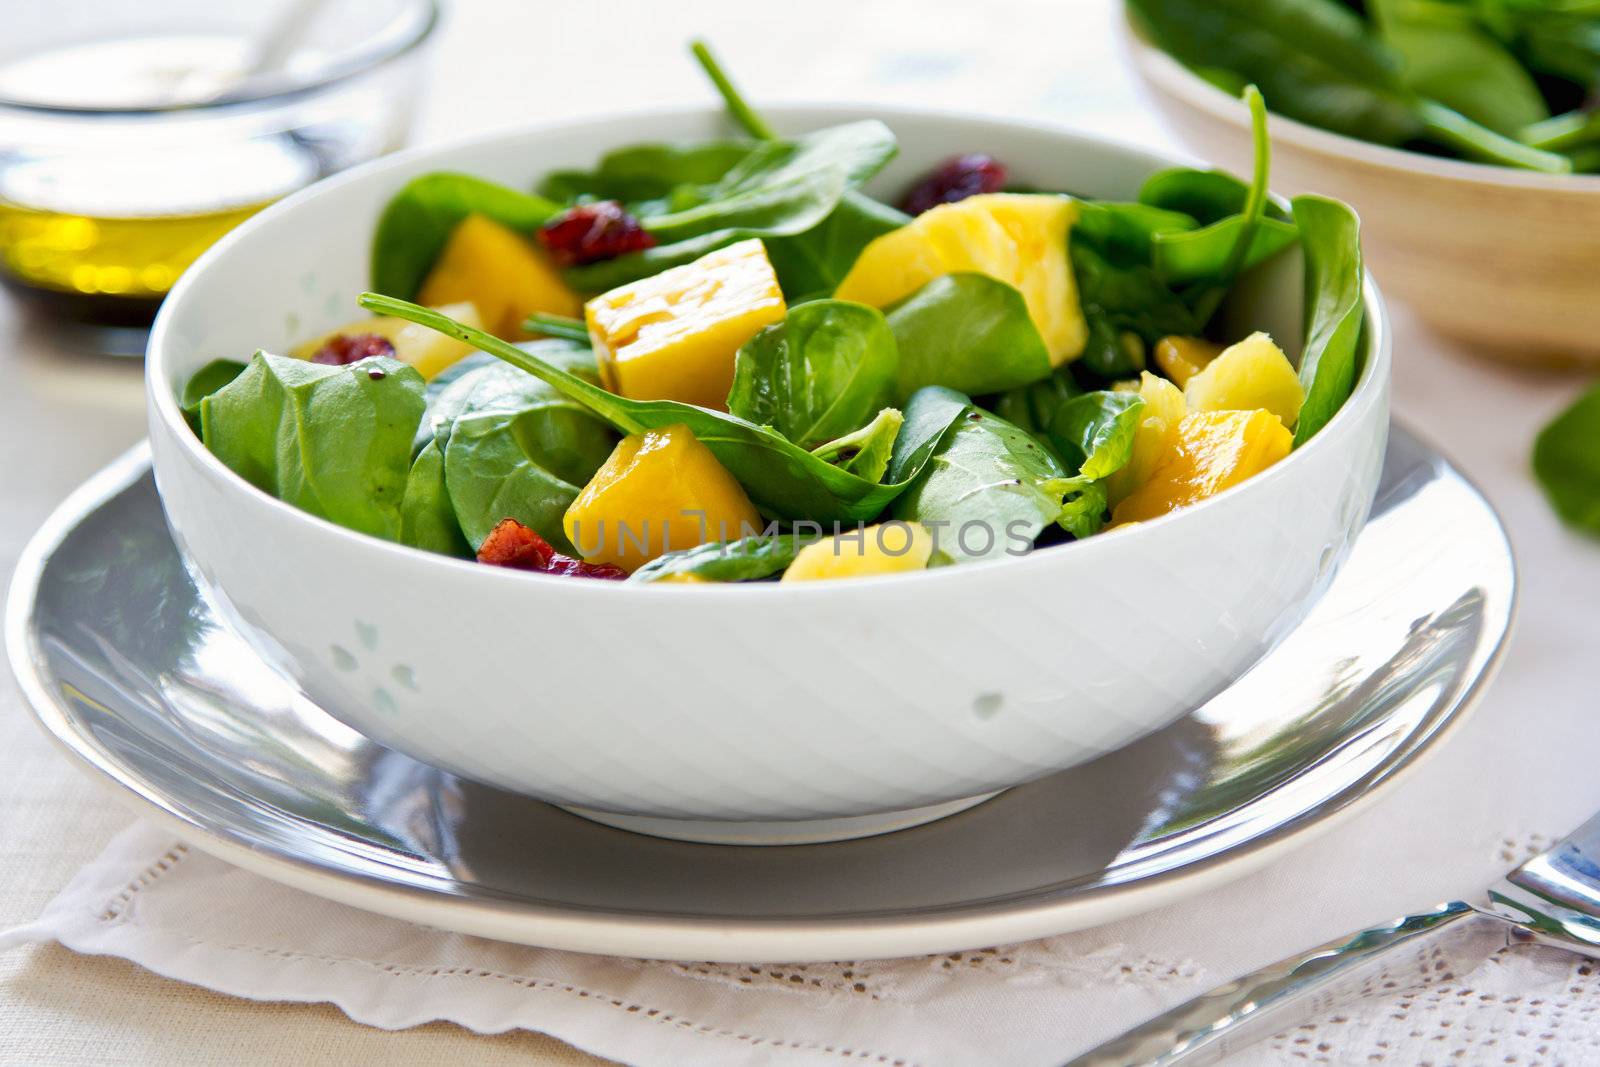 Mango and Pineapple with Spinach salad by vanillaechoes